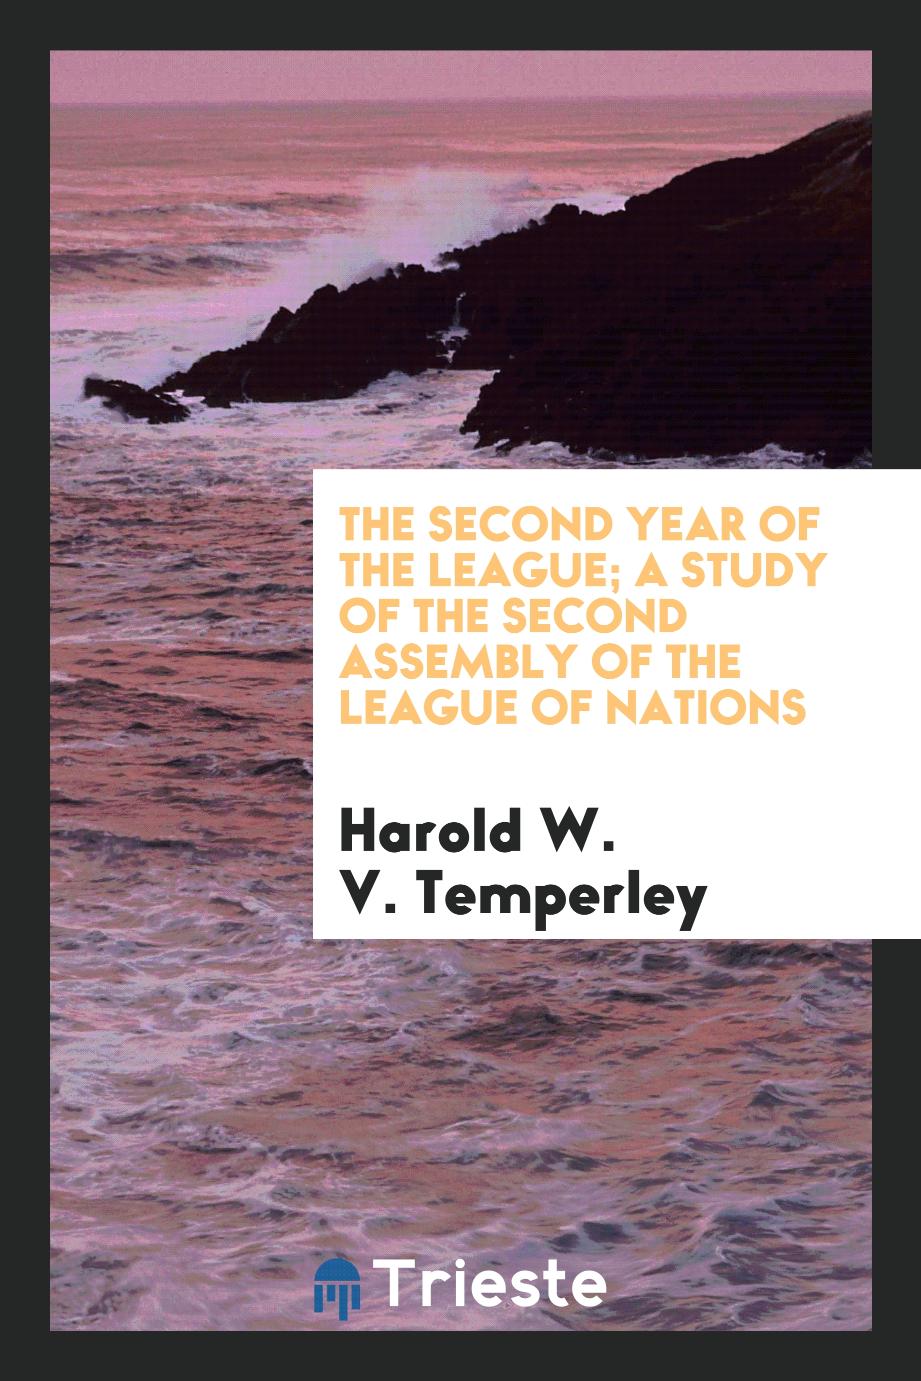 The second year of the League; a study of the second Assembly of the League of nations